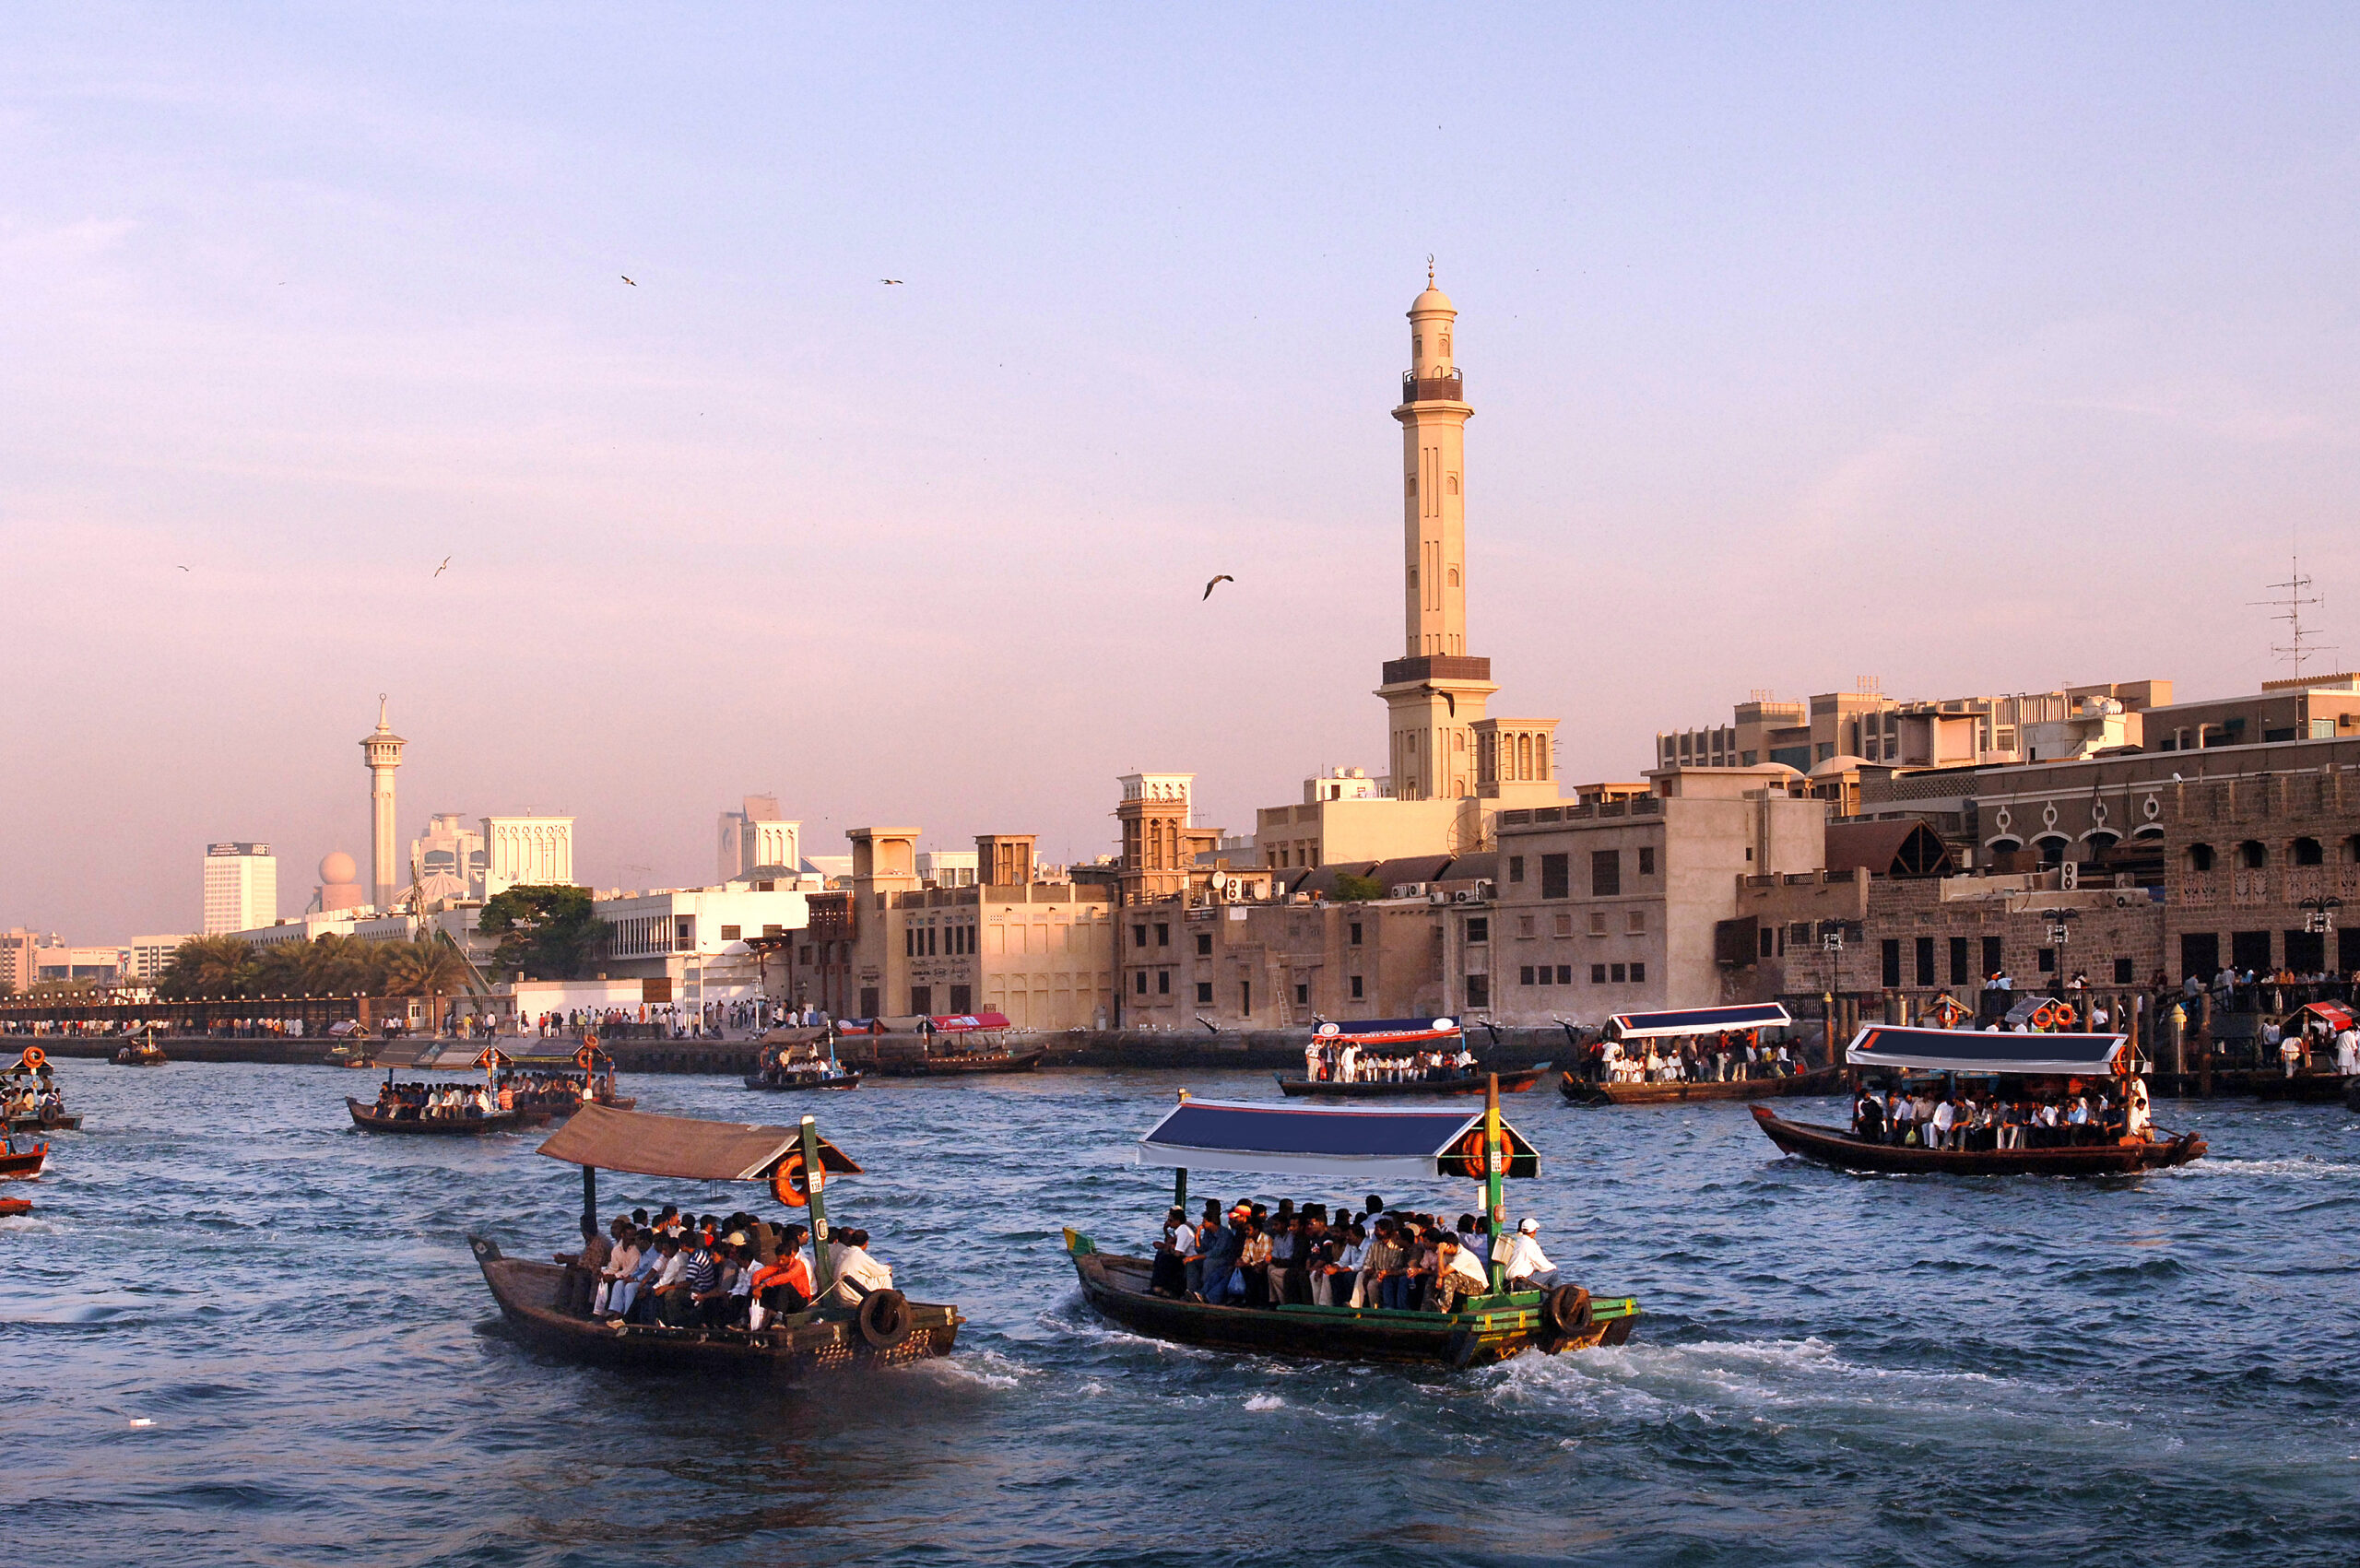 Dubai Customs and Traditions - Abra water taxi